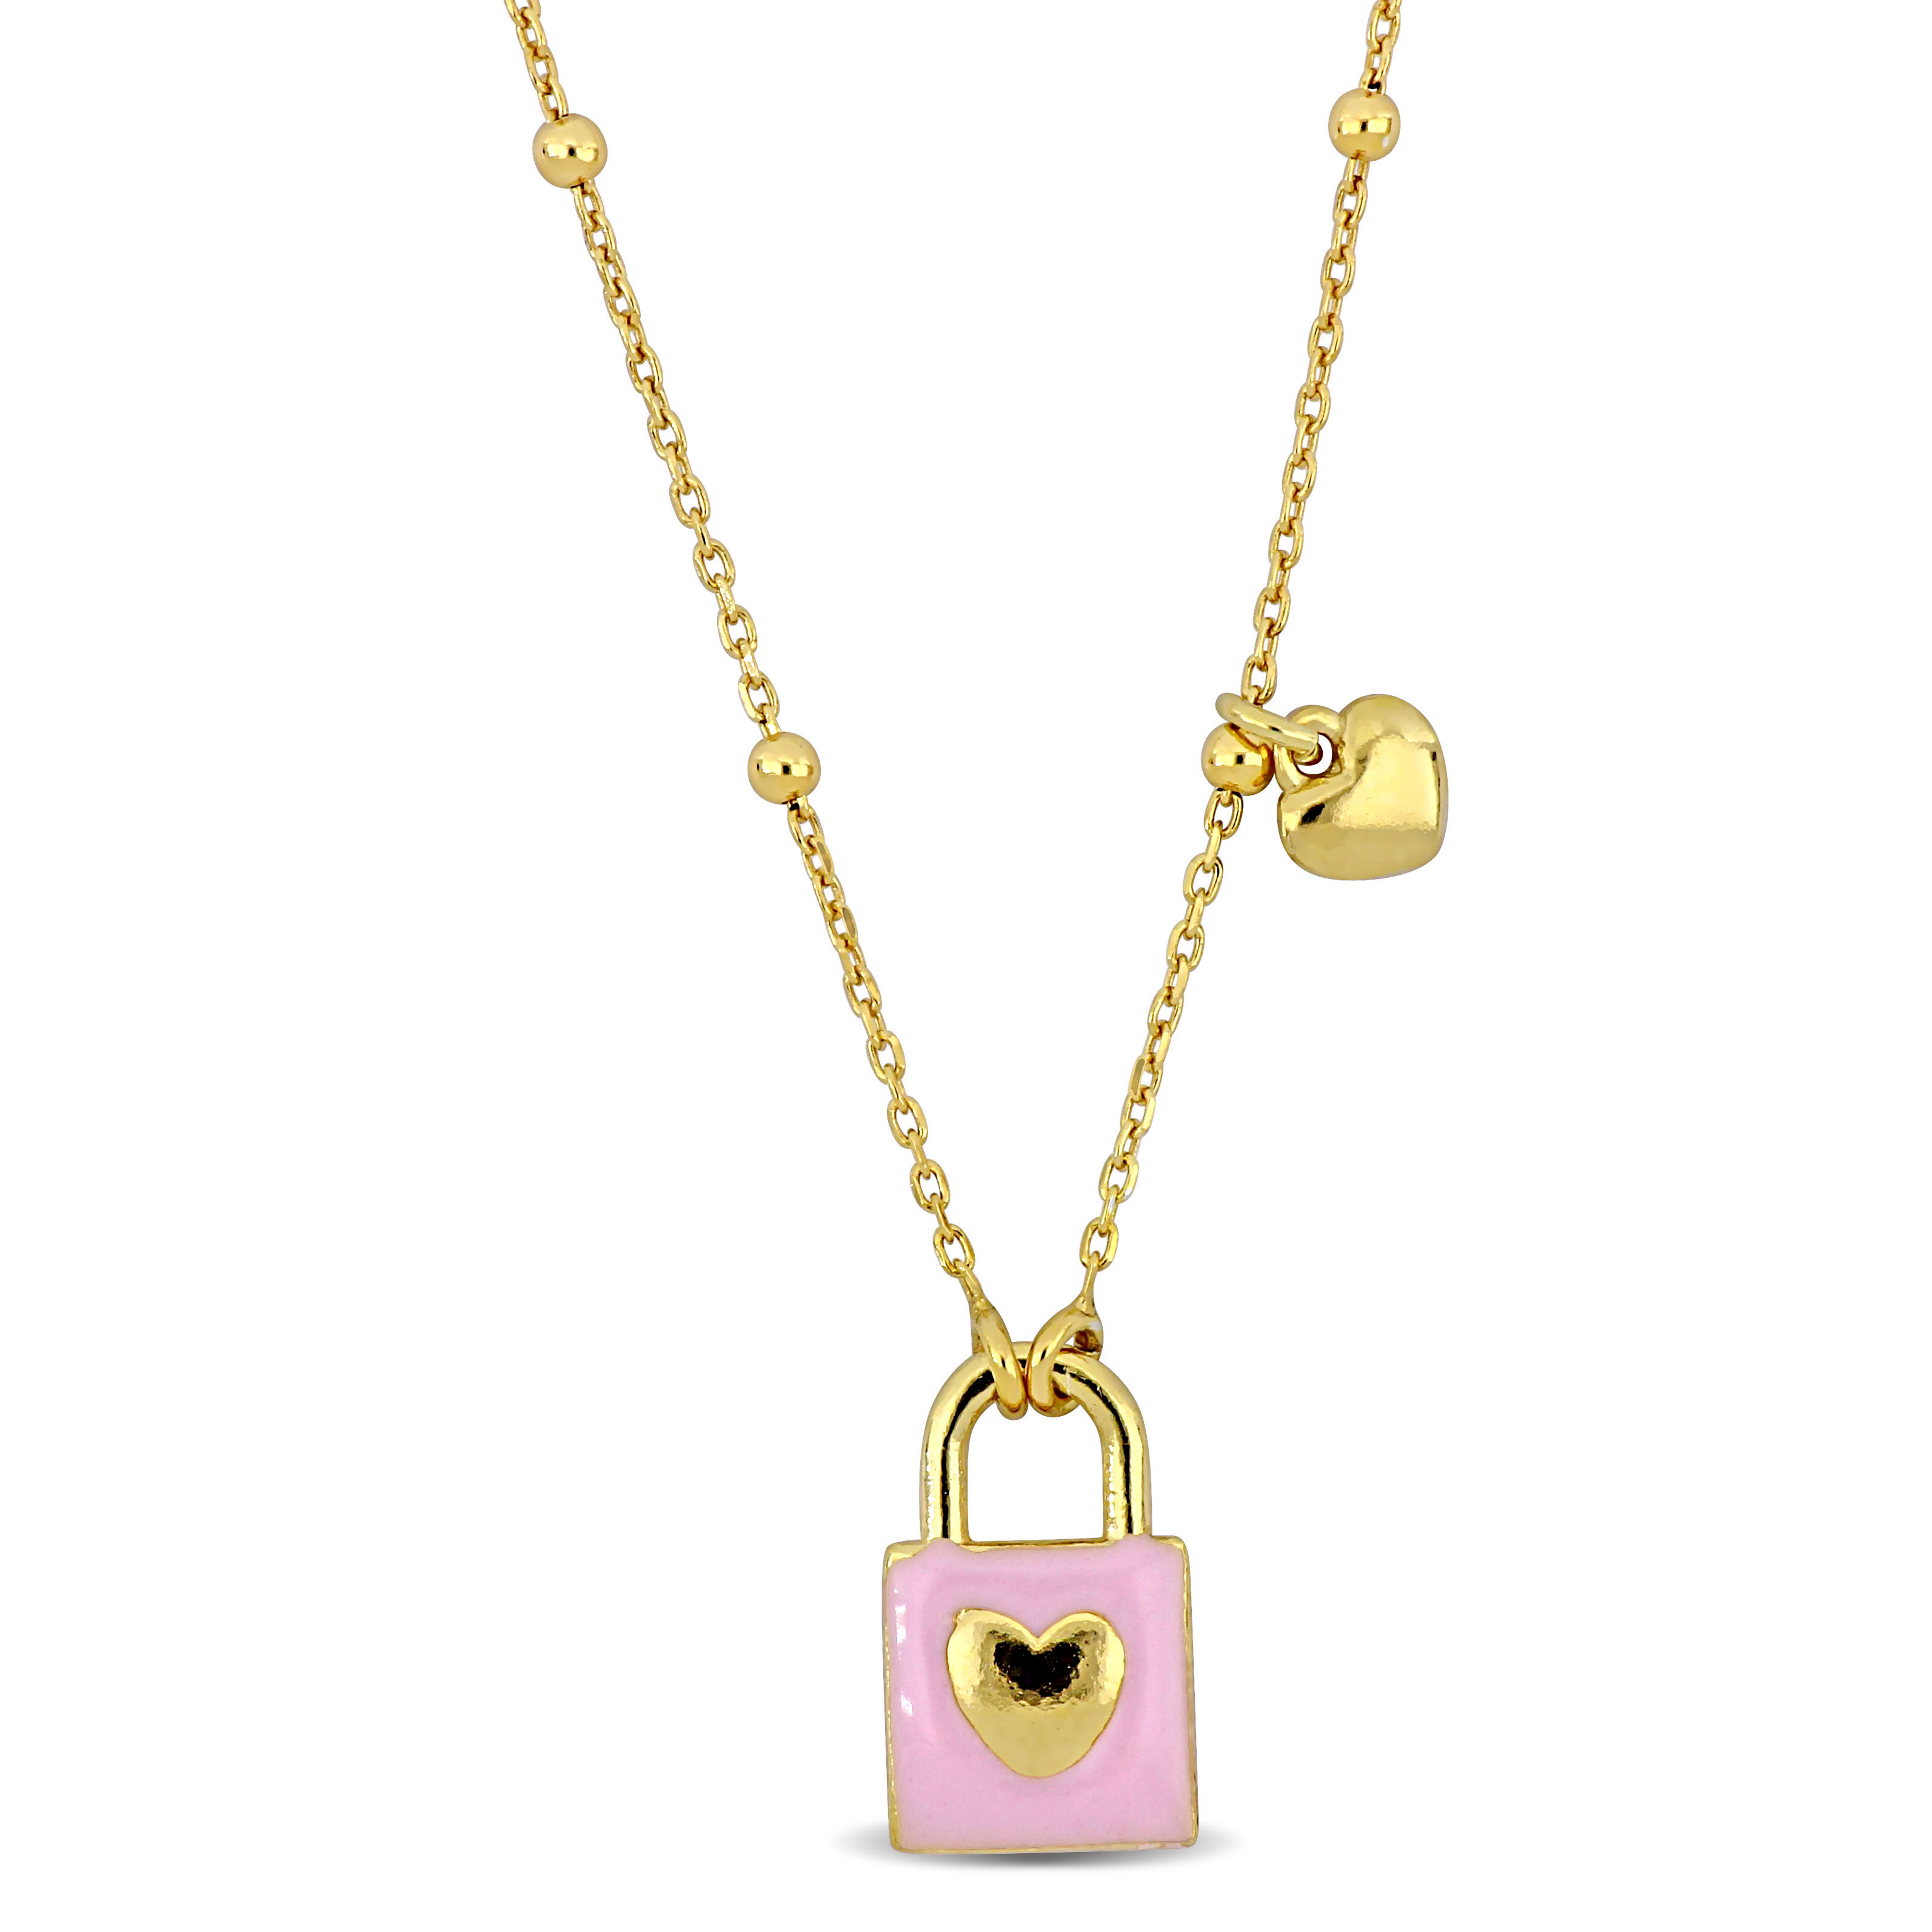 Pink Enamel Lock and Heart Charm Necklace on Diamond Cut Ball Bead Chain in Yellow Silver- 16.5+1 in.